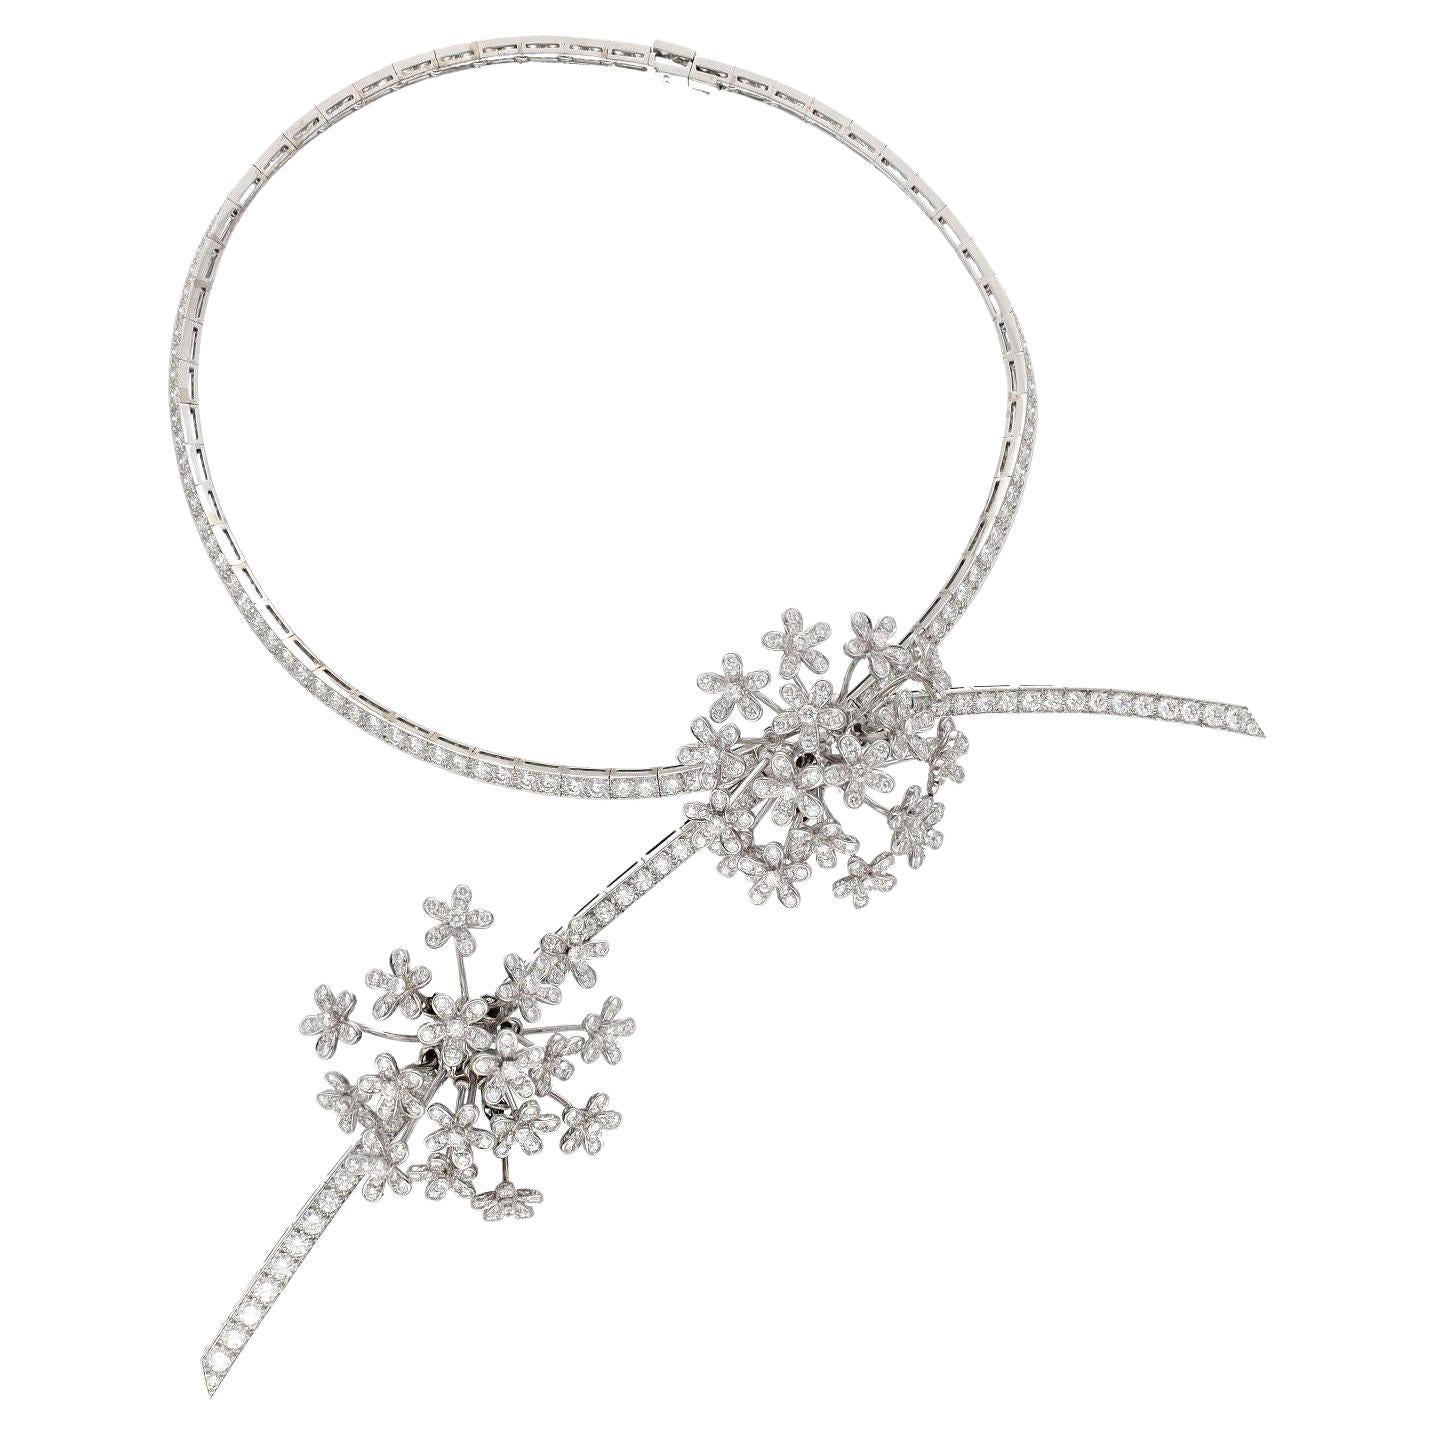 Van Cleef & Arpels "Socrate" Collection Diamond Necklace/Brooch For Sale